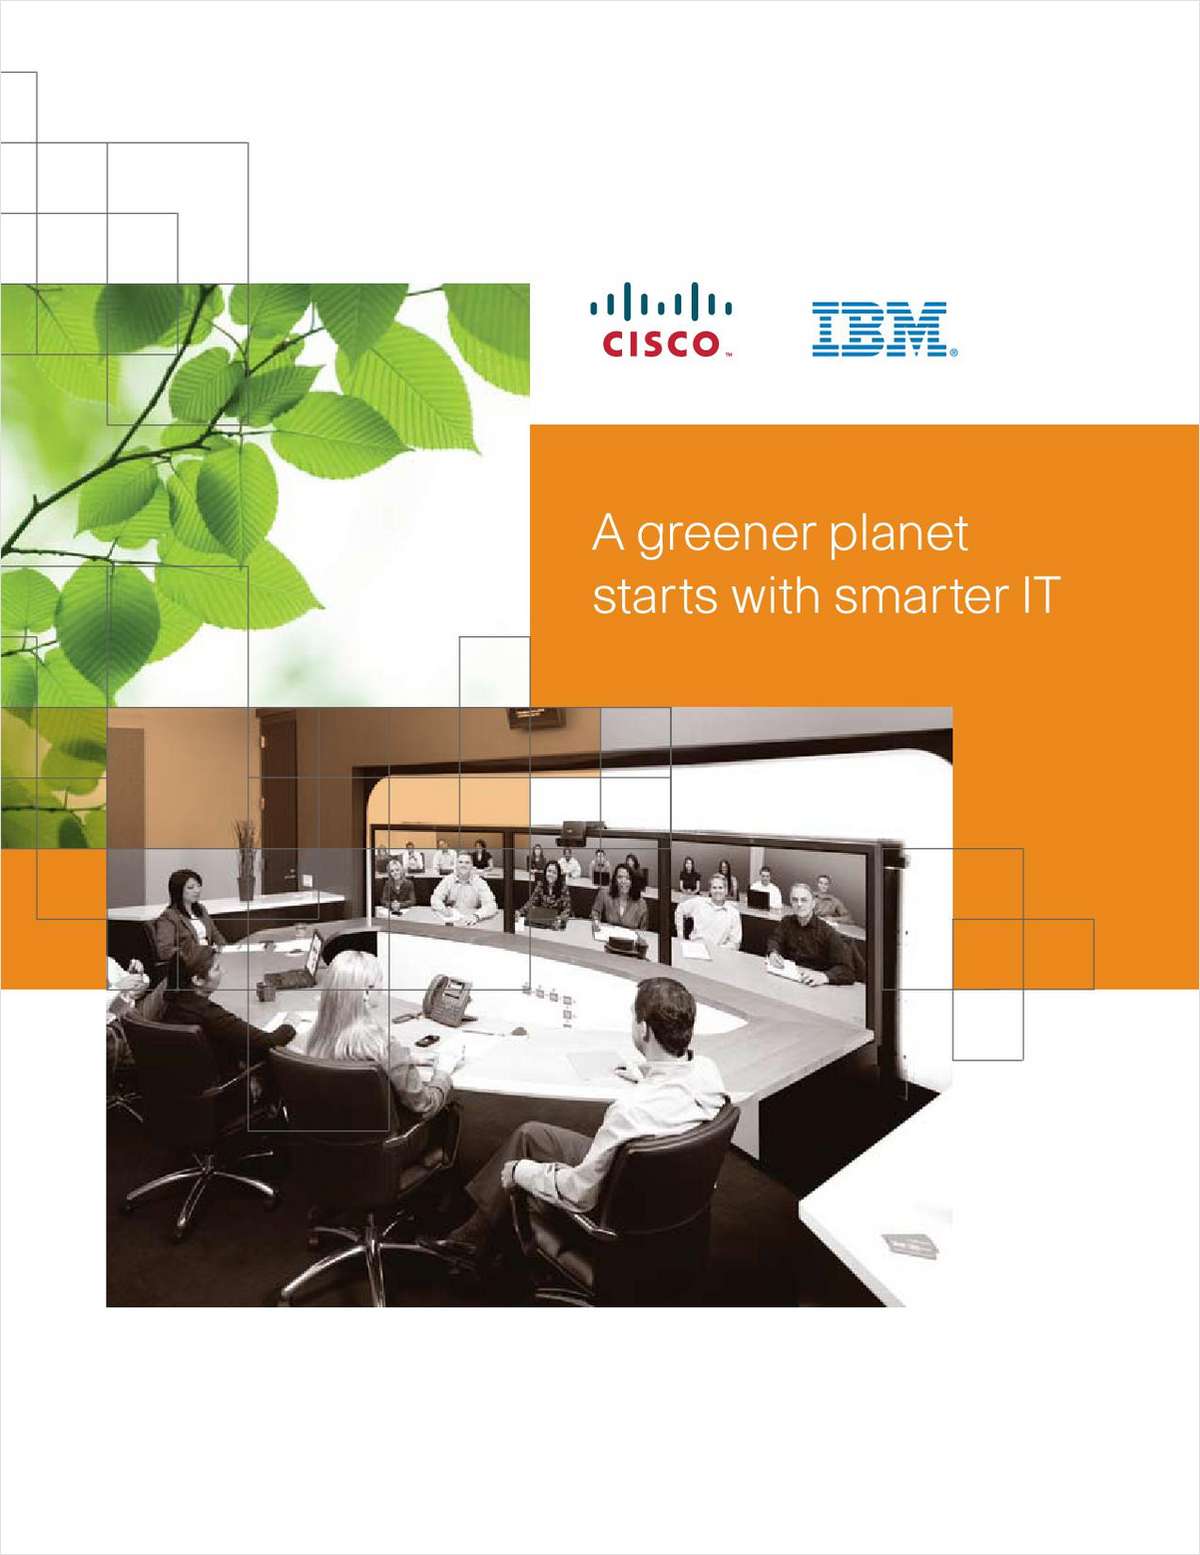 A Greener Planet Starts with Smarter IT